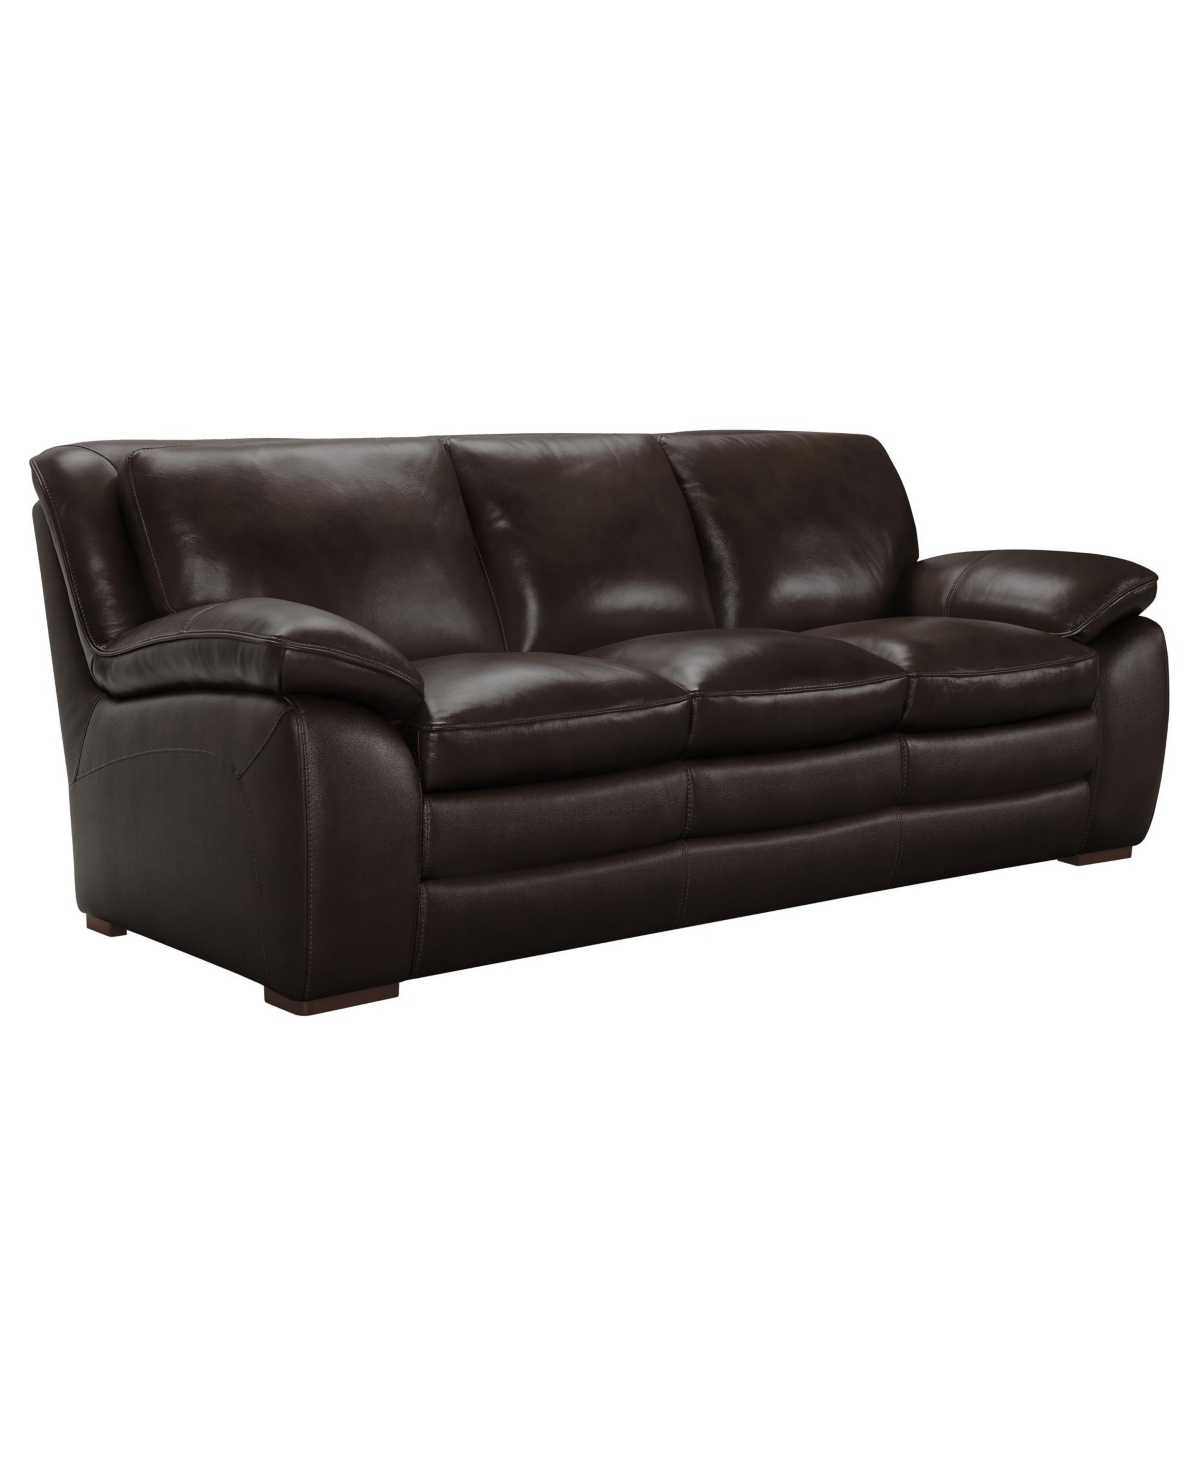 Shop Armen Living Zanna 91" Genuine Leather With Wood Legs In Contemporary Sofa In Dark Brown